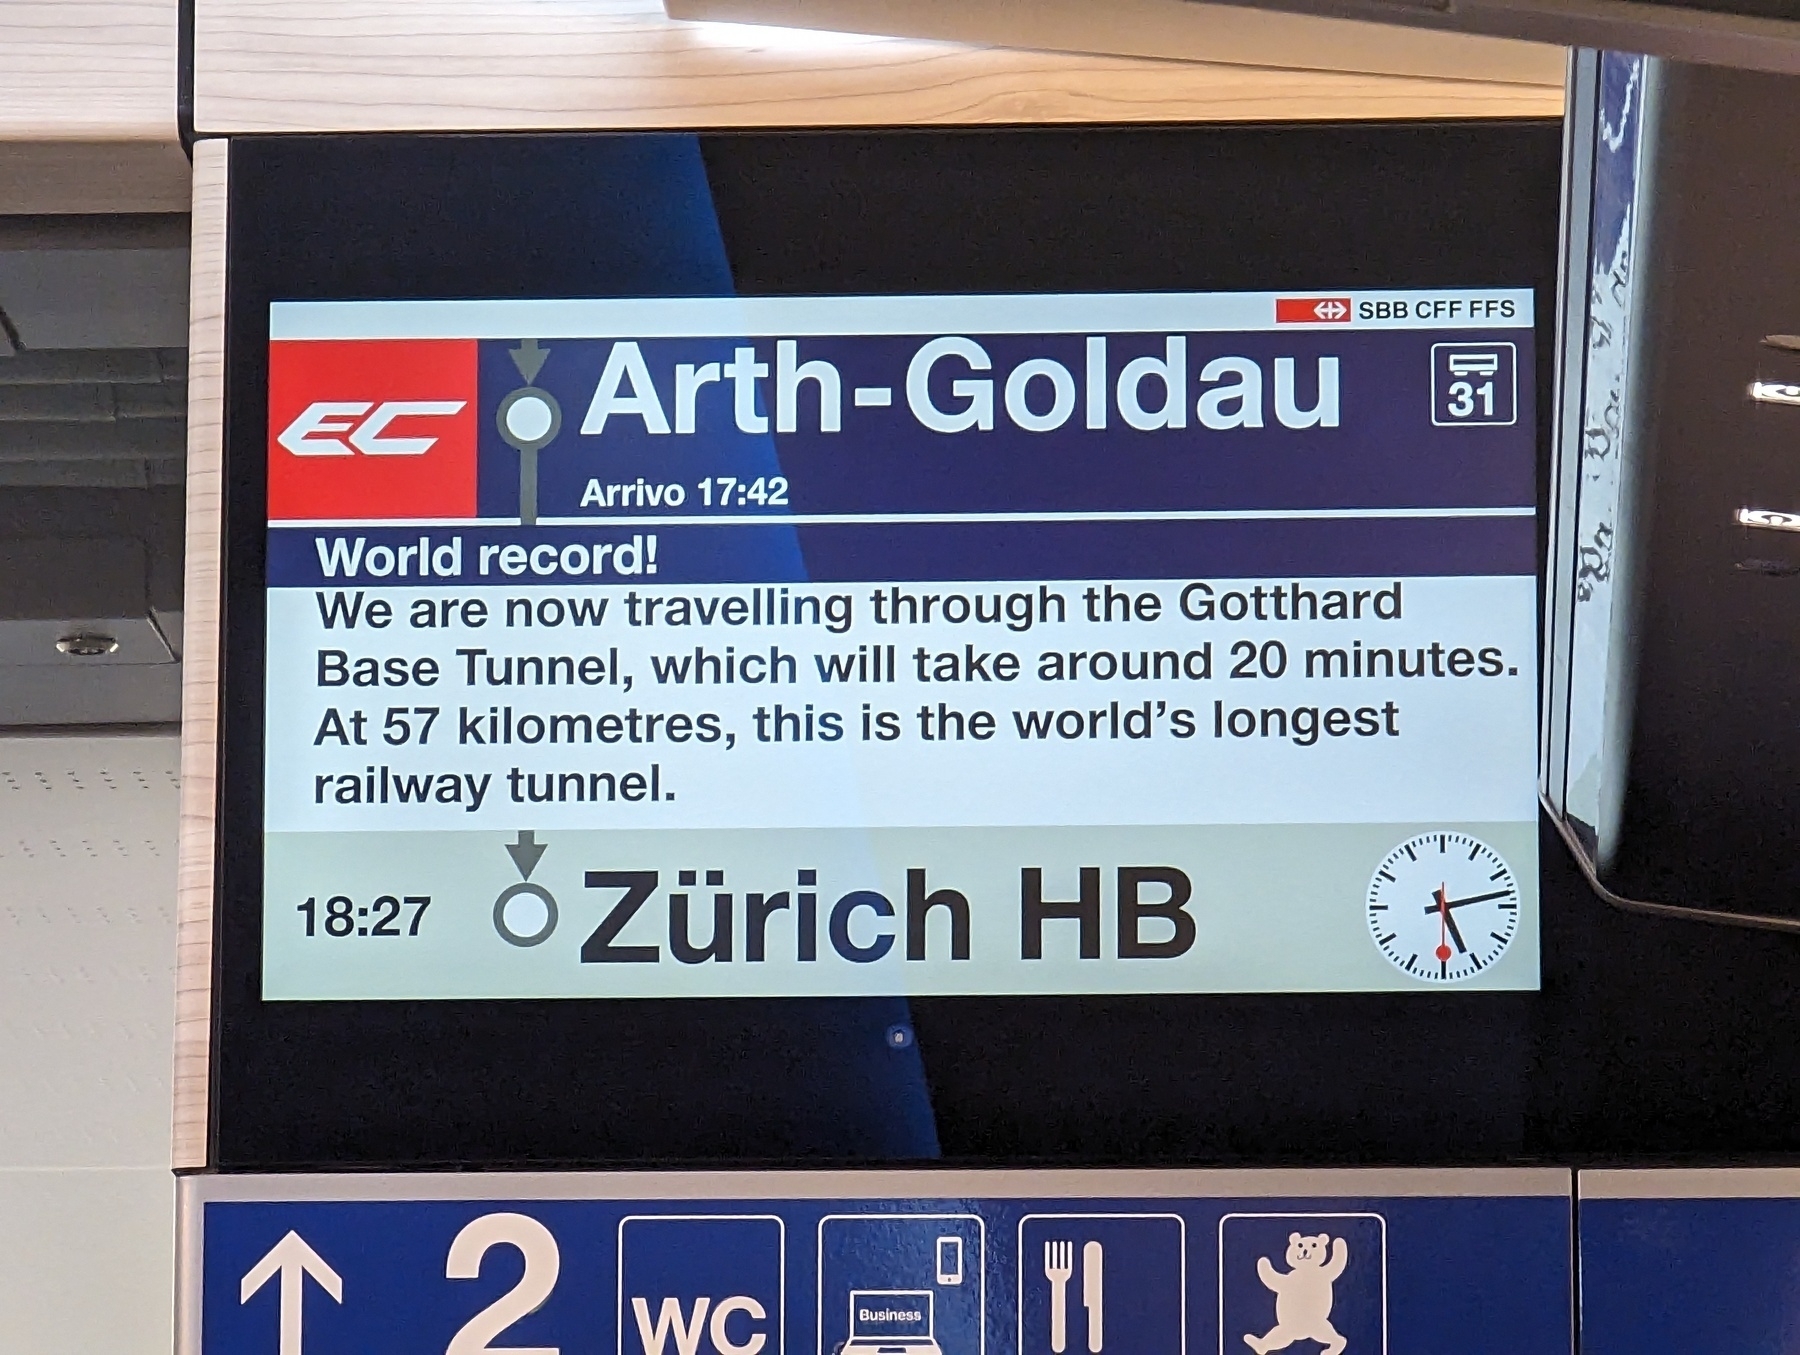 A picture of a monitor inside a train carriage with some logos below it. The monitor has the following message: World Record! We are now travelling through the Gotthard Base Tunnel, which will take around 20 minutes. At 57 kilometres, this is the world's longest railway tunnel.